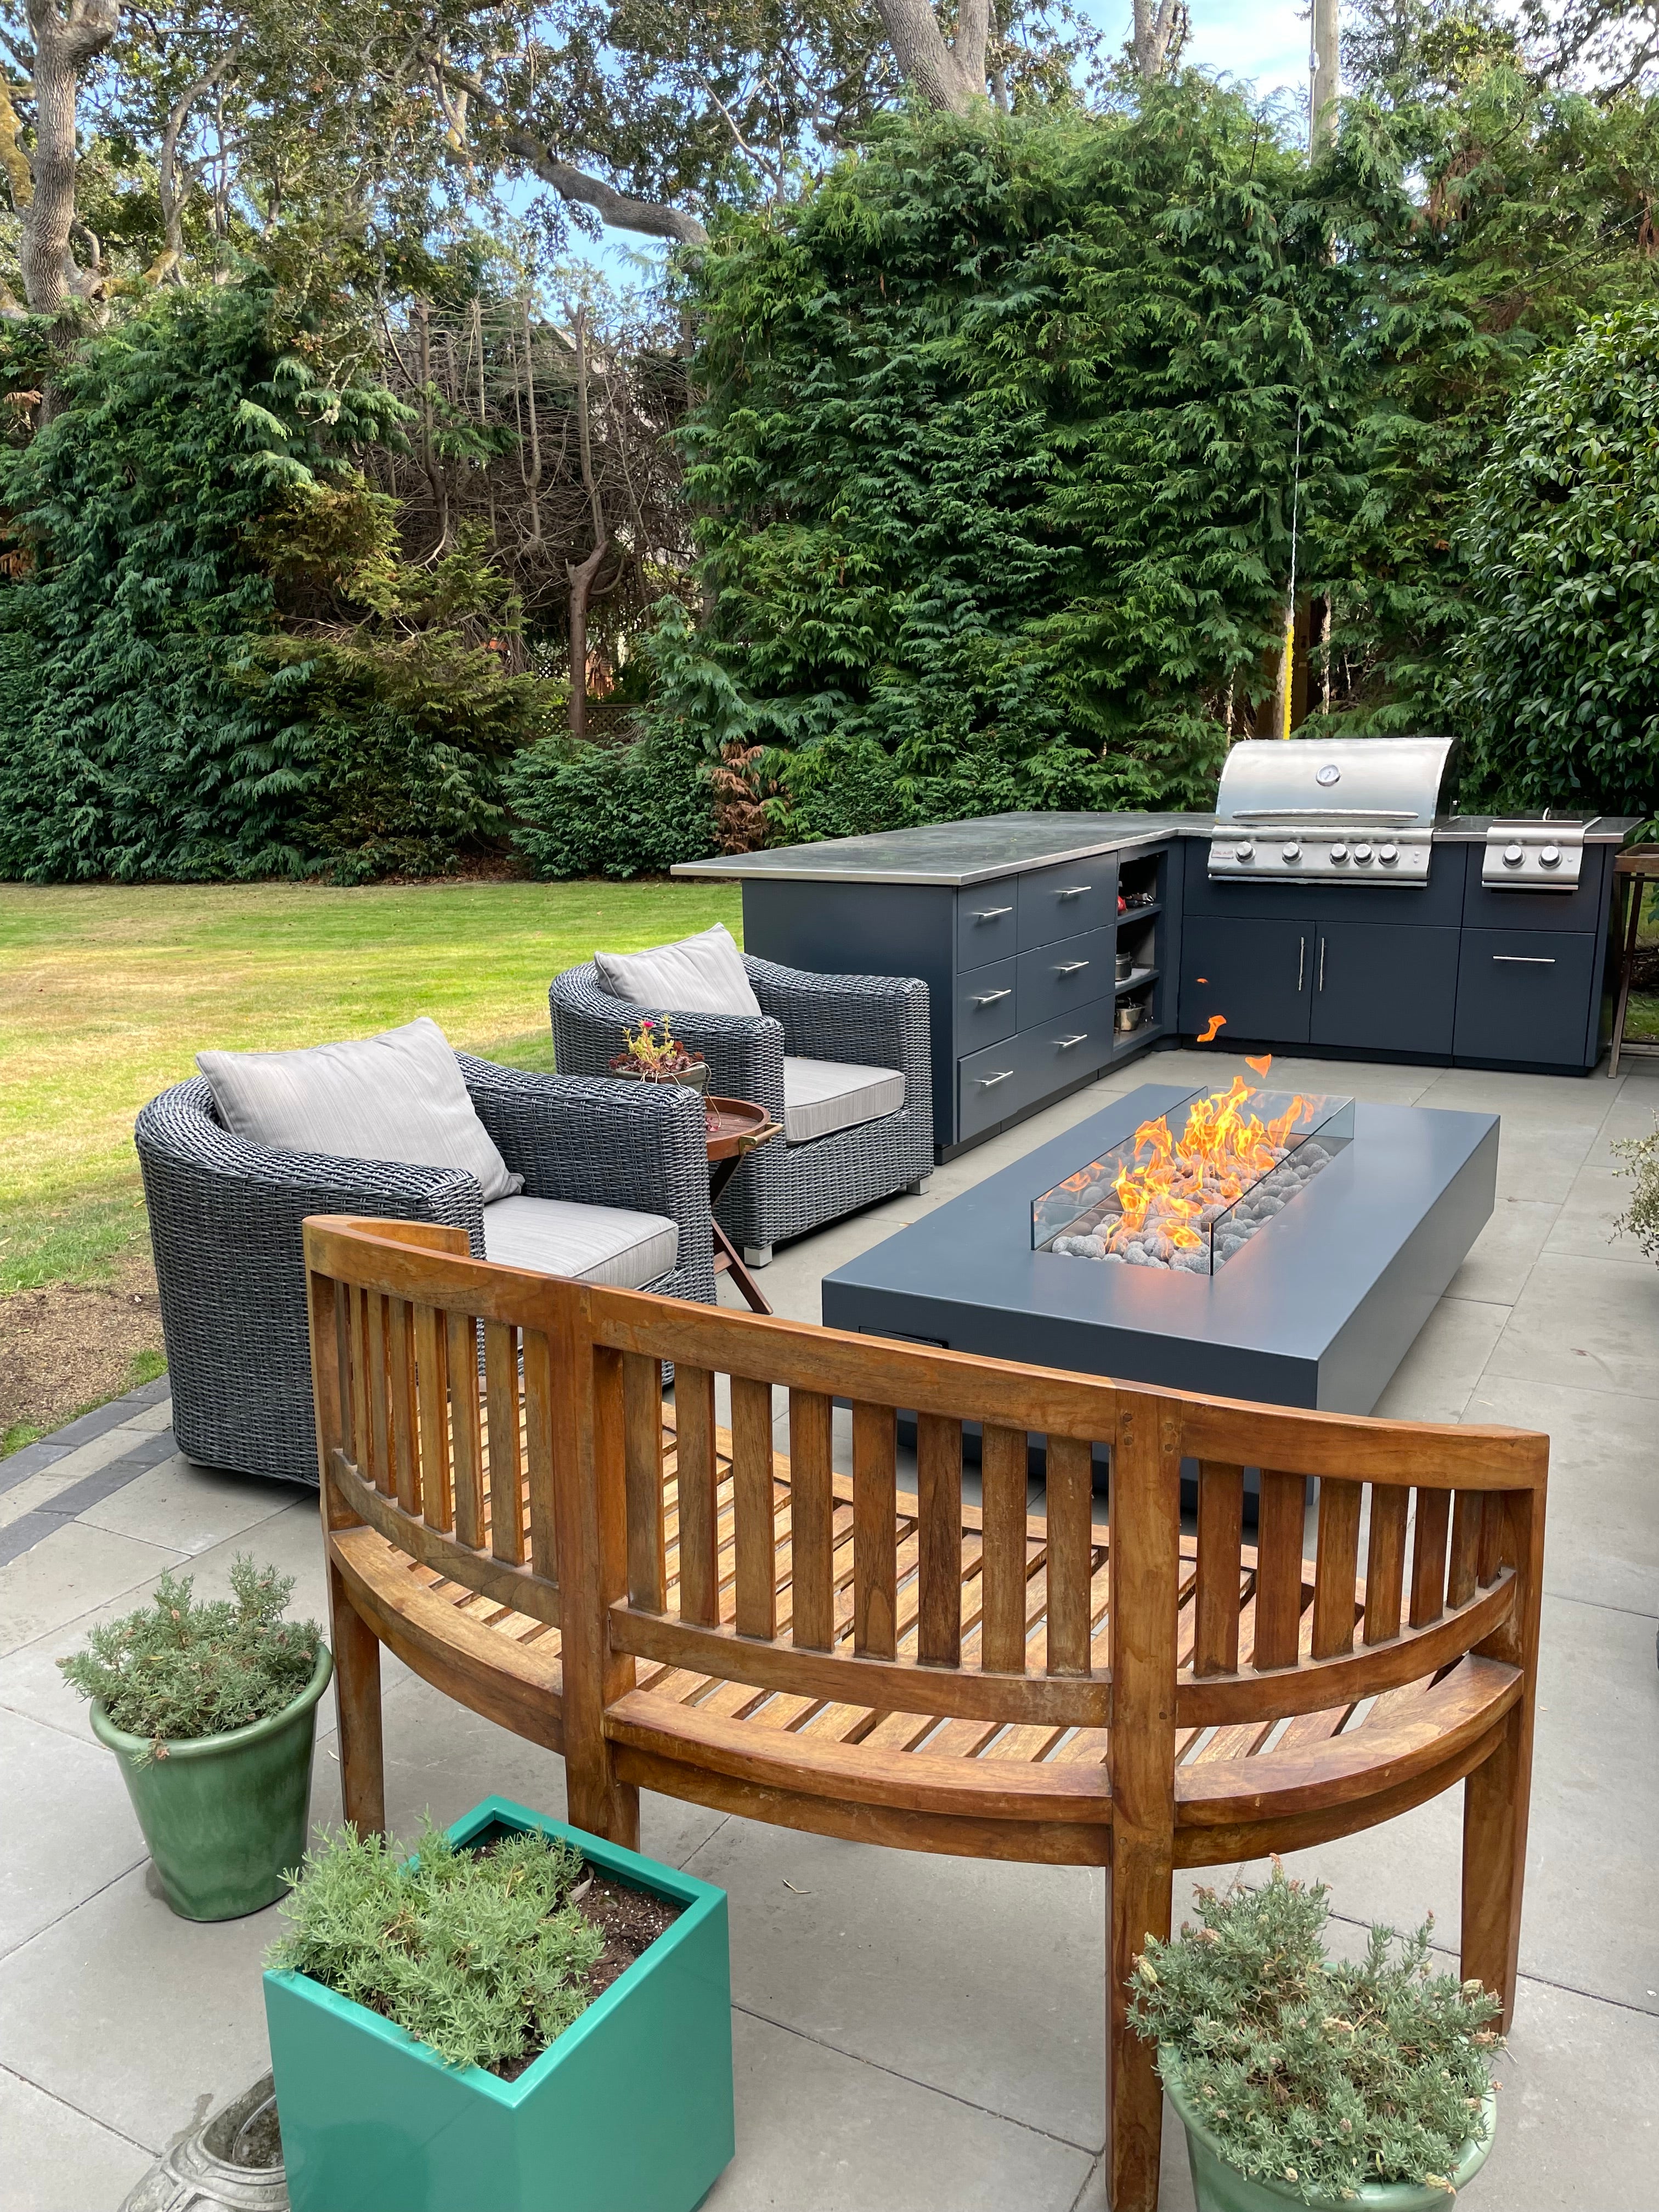 Crafting Excellence: The Art of Designing and Manufacturing Powder-Coated Outdoor Metal Kitchen and Fire Table